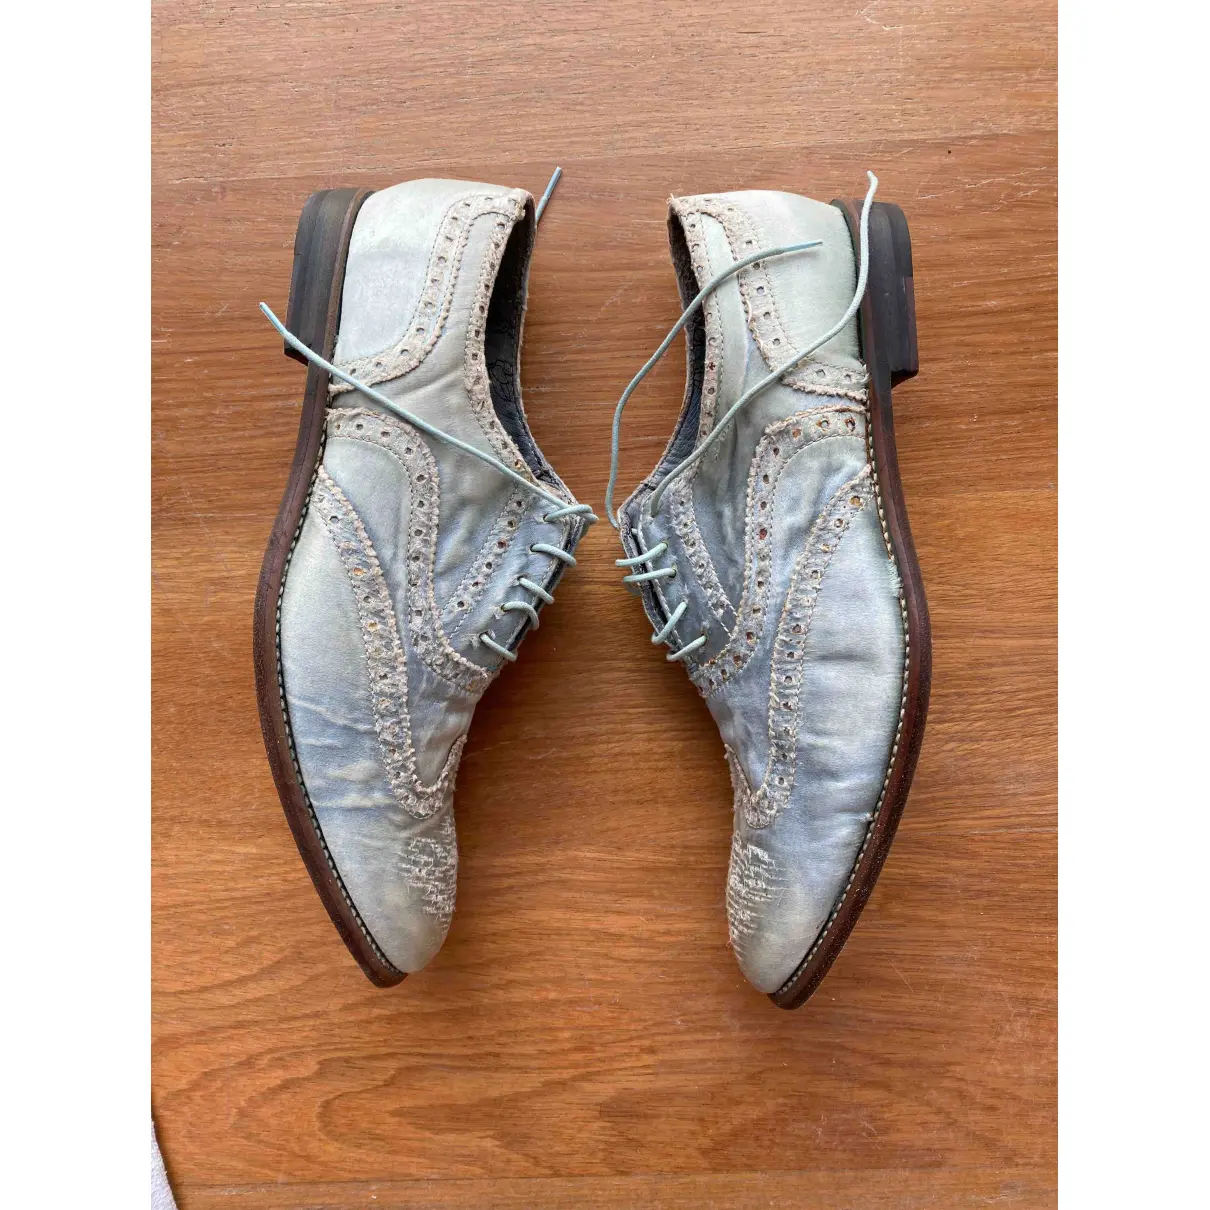 Buy Paul Smith Cloth lace ups online - Vintage